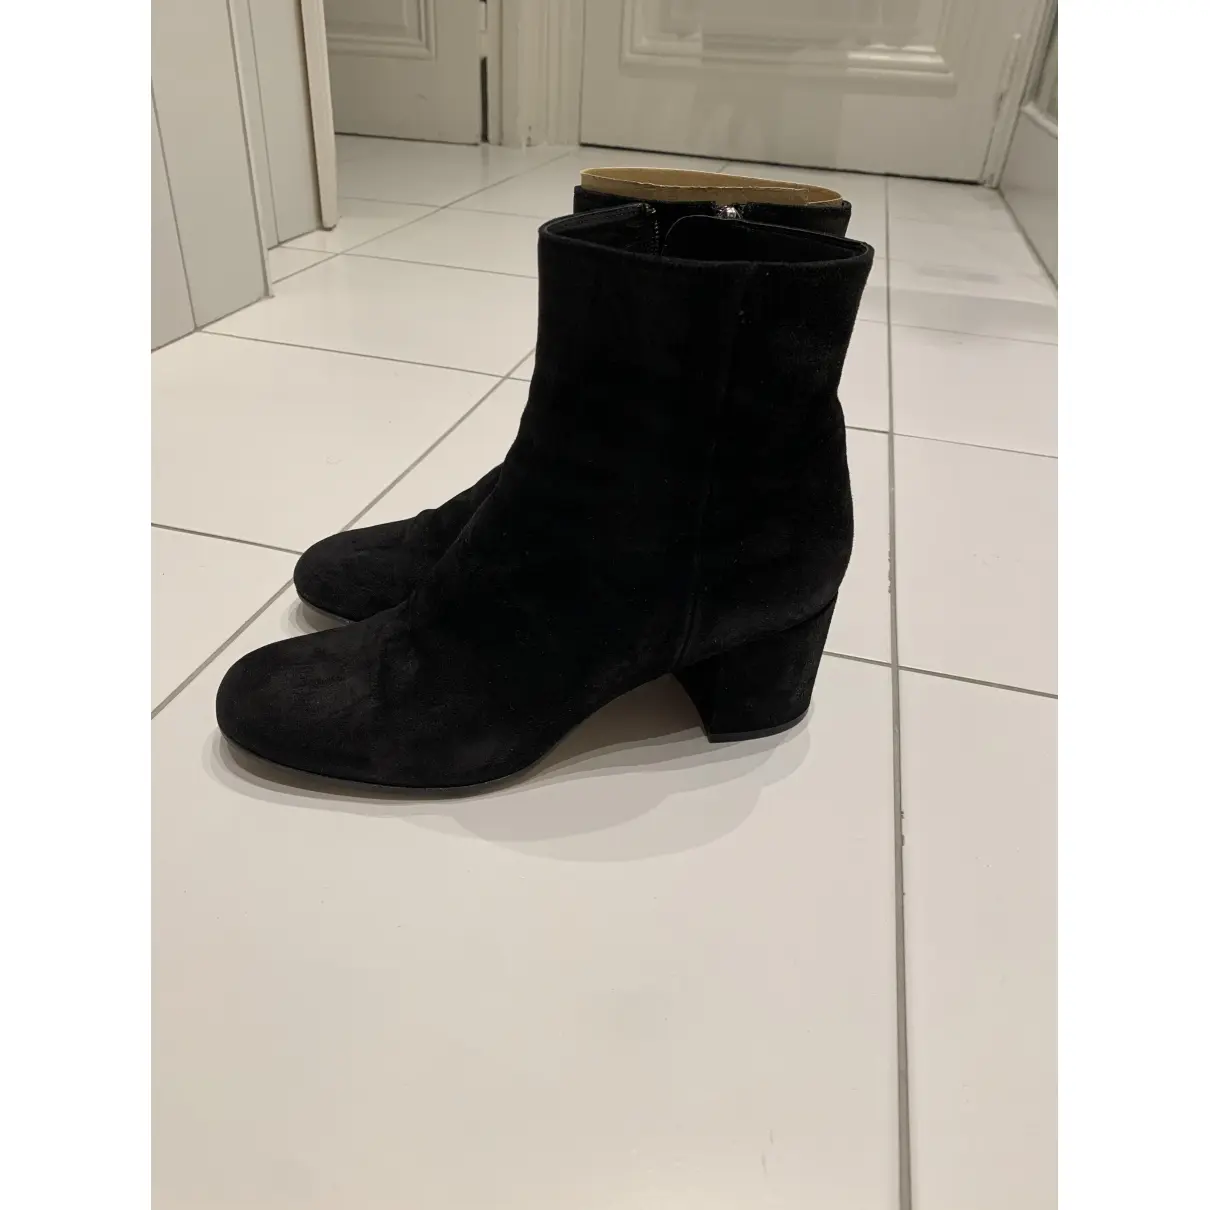 Buy Gianvito Rossi Ankle boots online